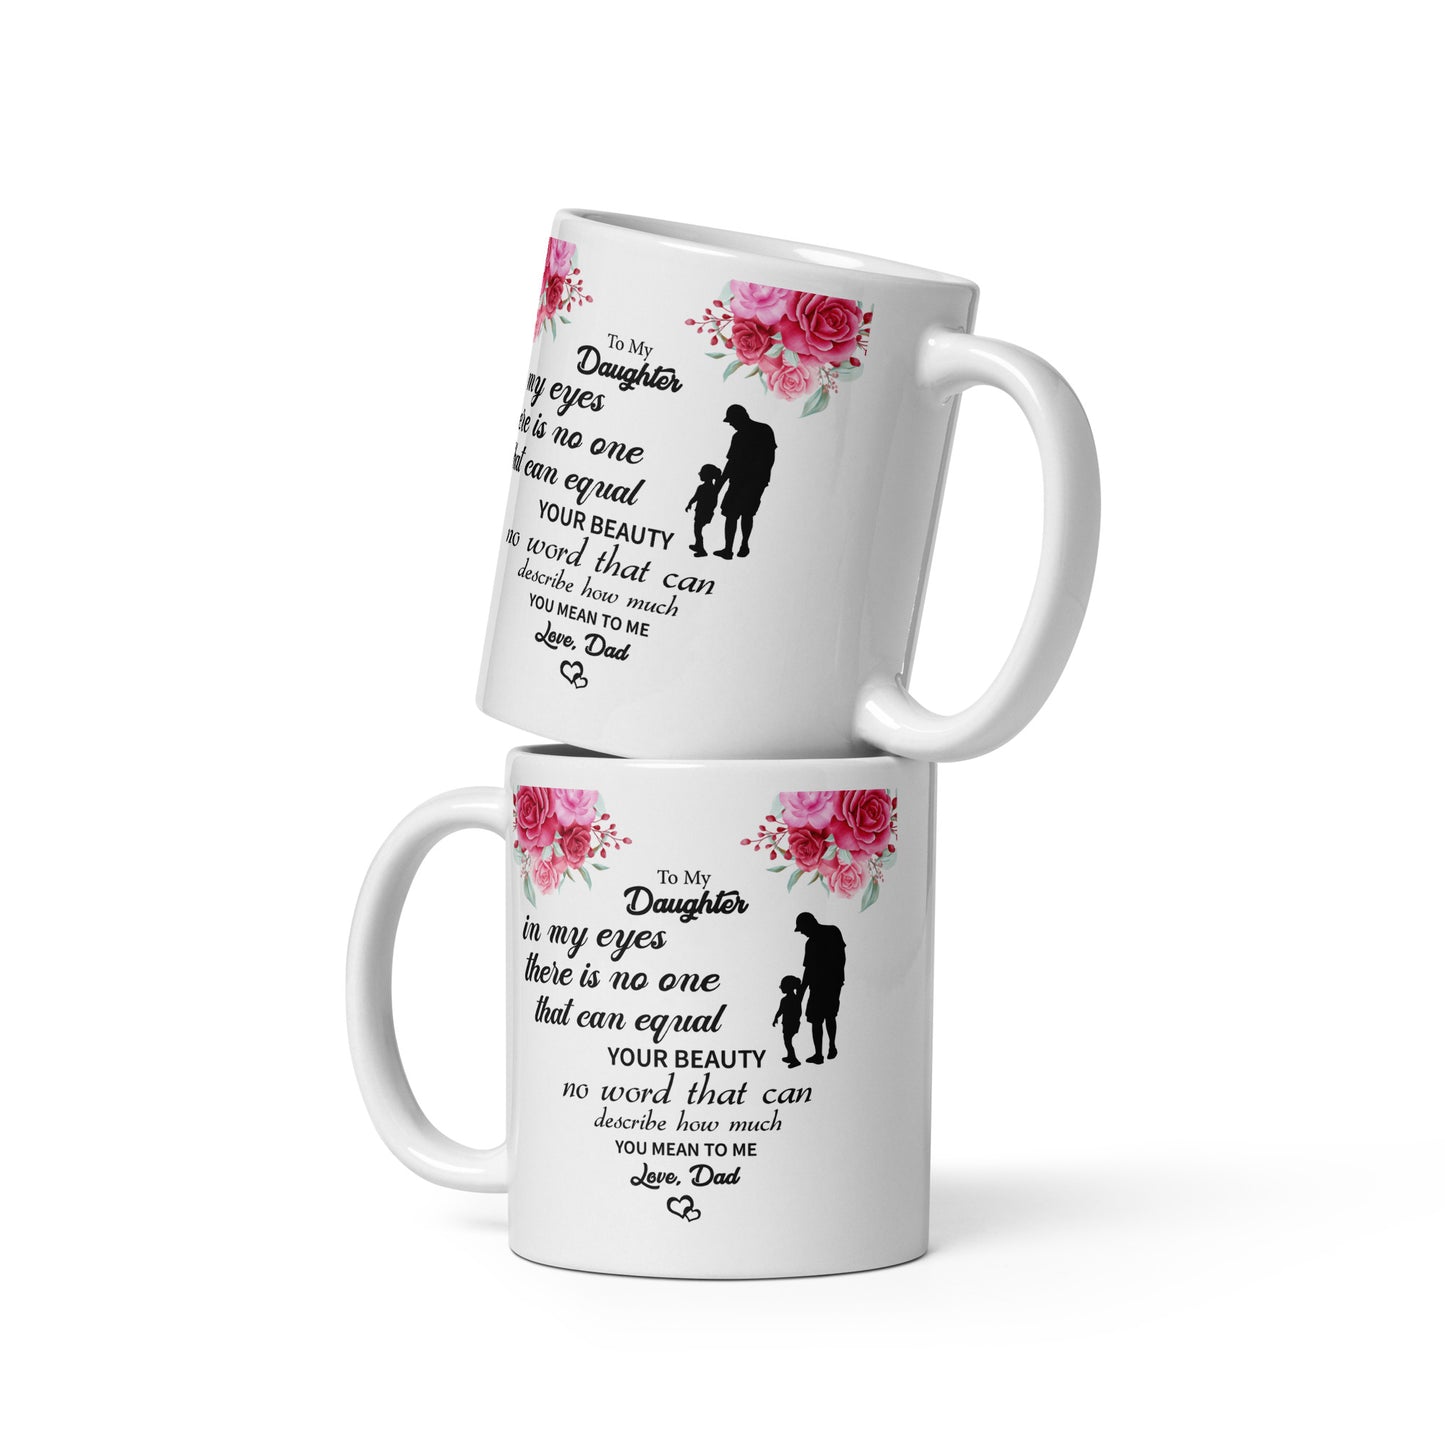 To My Daughter in my eyes you Personalized Mug Gift Customized Mug Gift w Heartfelt Message